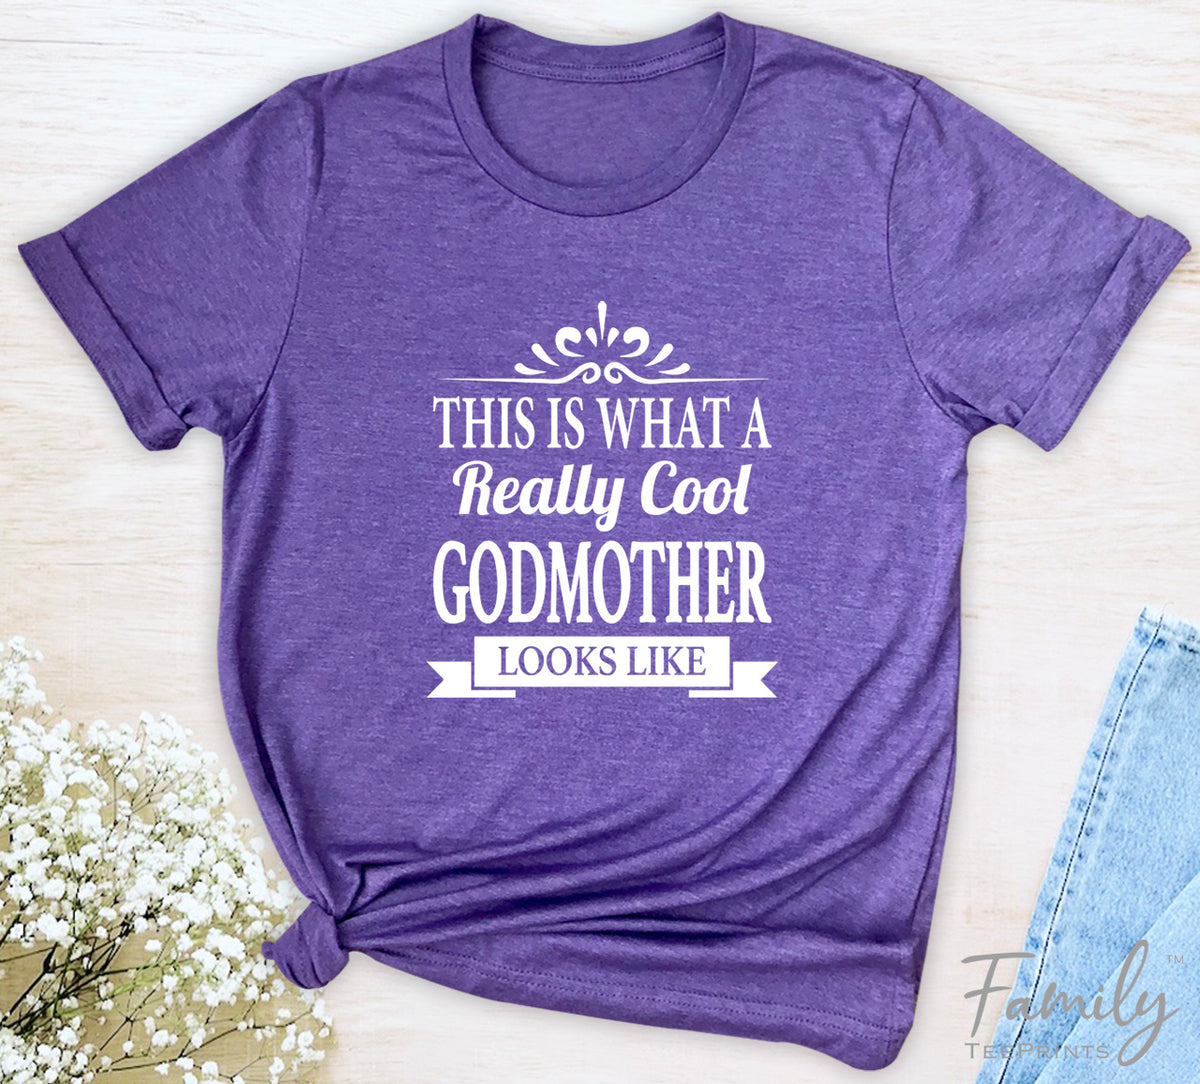 This Is What A Really Cool Godmother Looks Like - Unisex T-shirt - Godmother Shirt - Gift for Godmother - familyteeprints